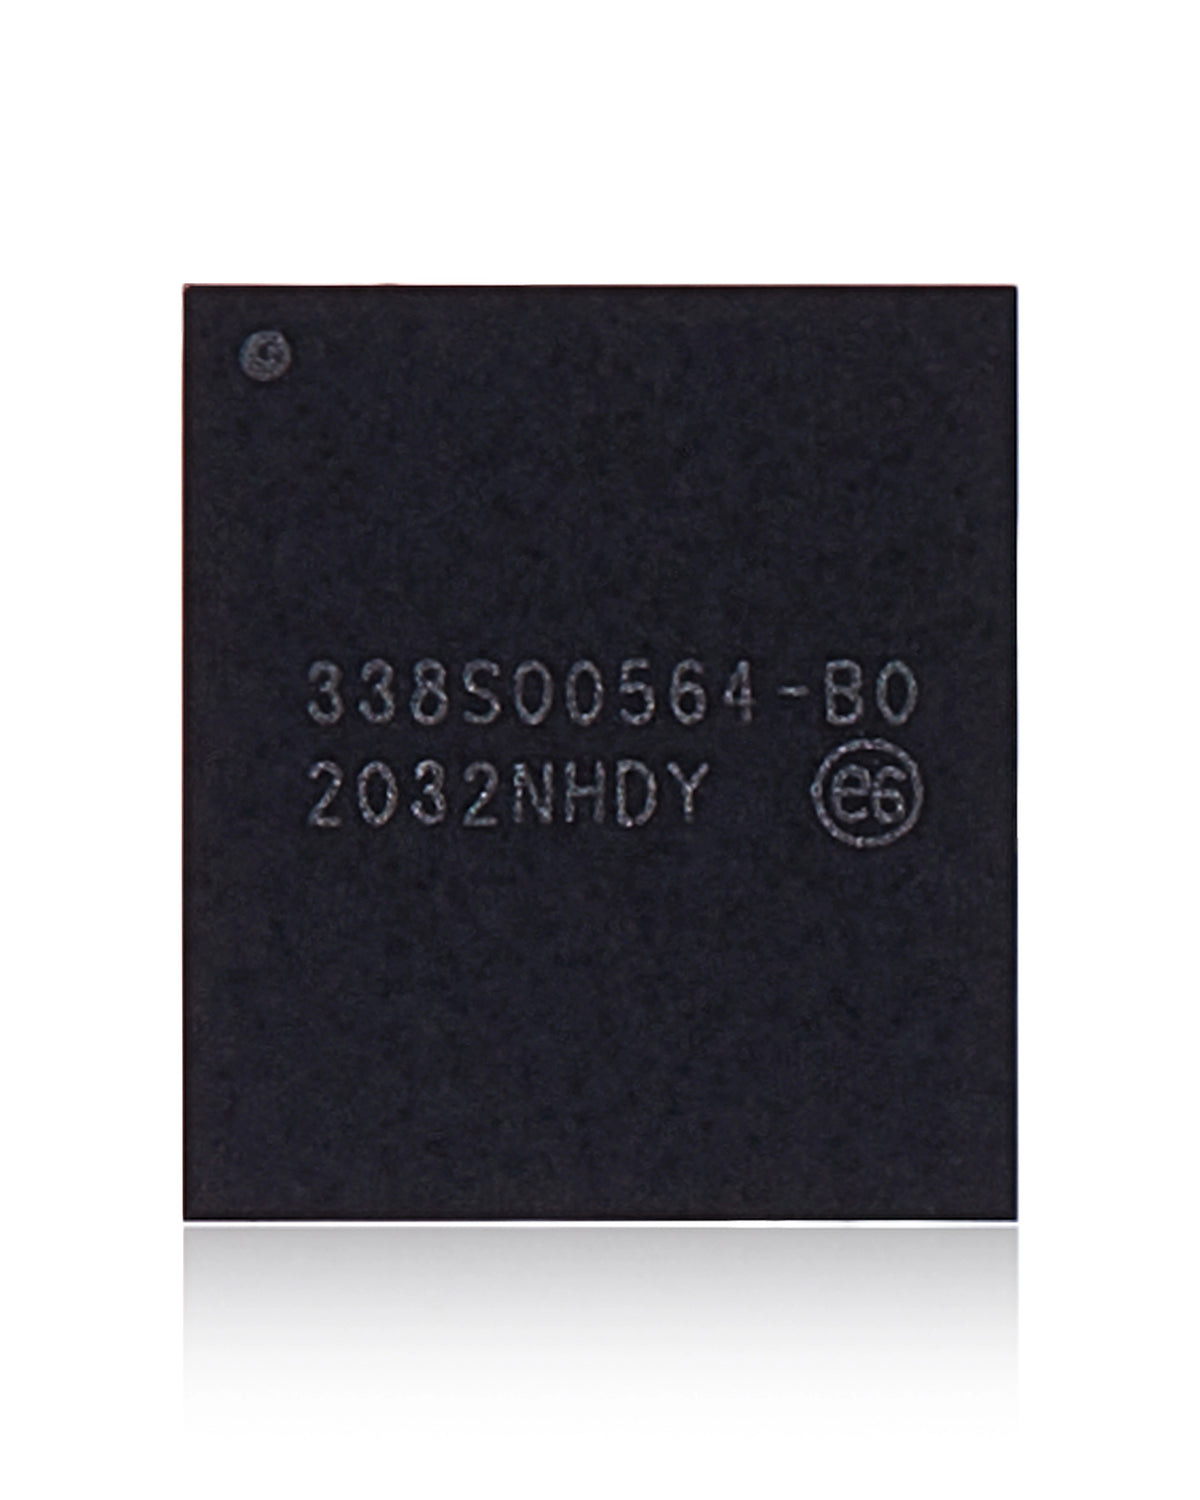 CAMERA IC CHIP COMPATIBLE WITH IPHONE 12 / 12 MINI / 12 PRO / 12 PRO MAX (338S00564)